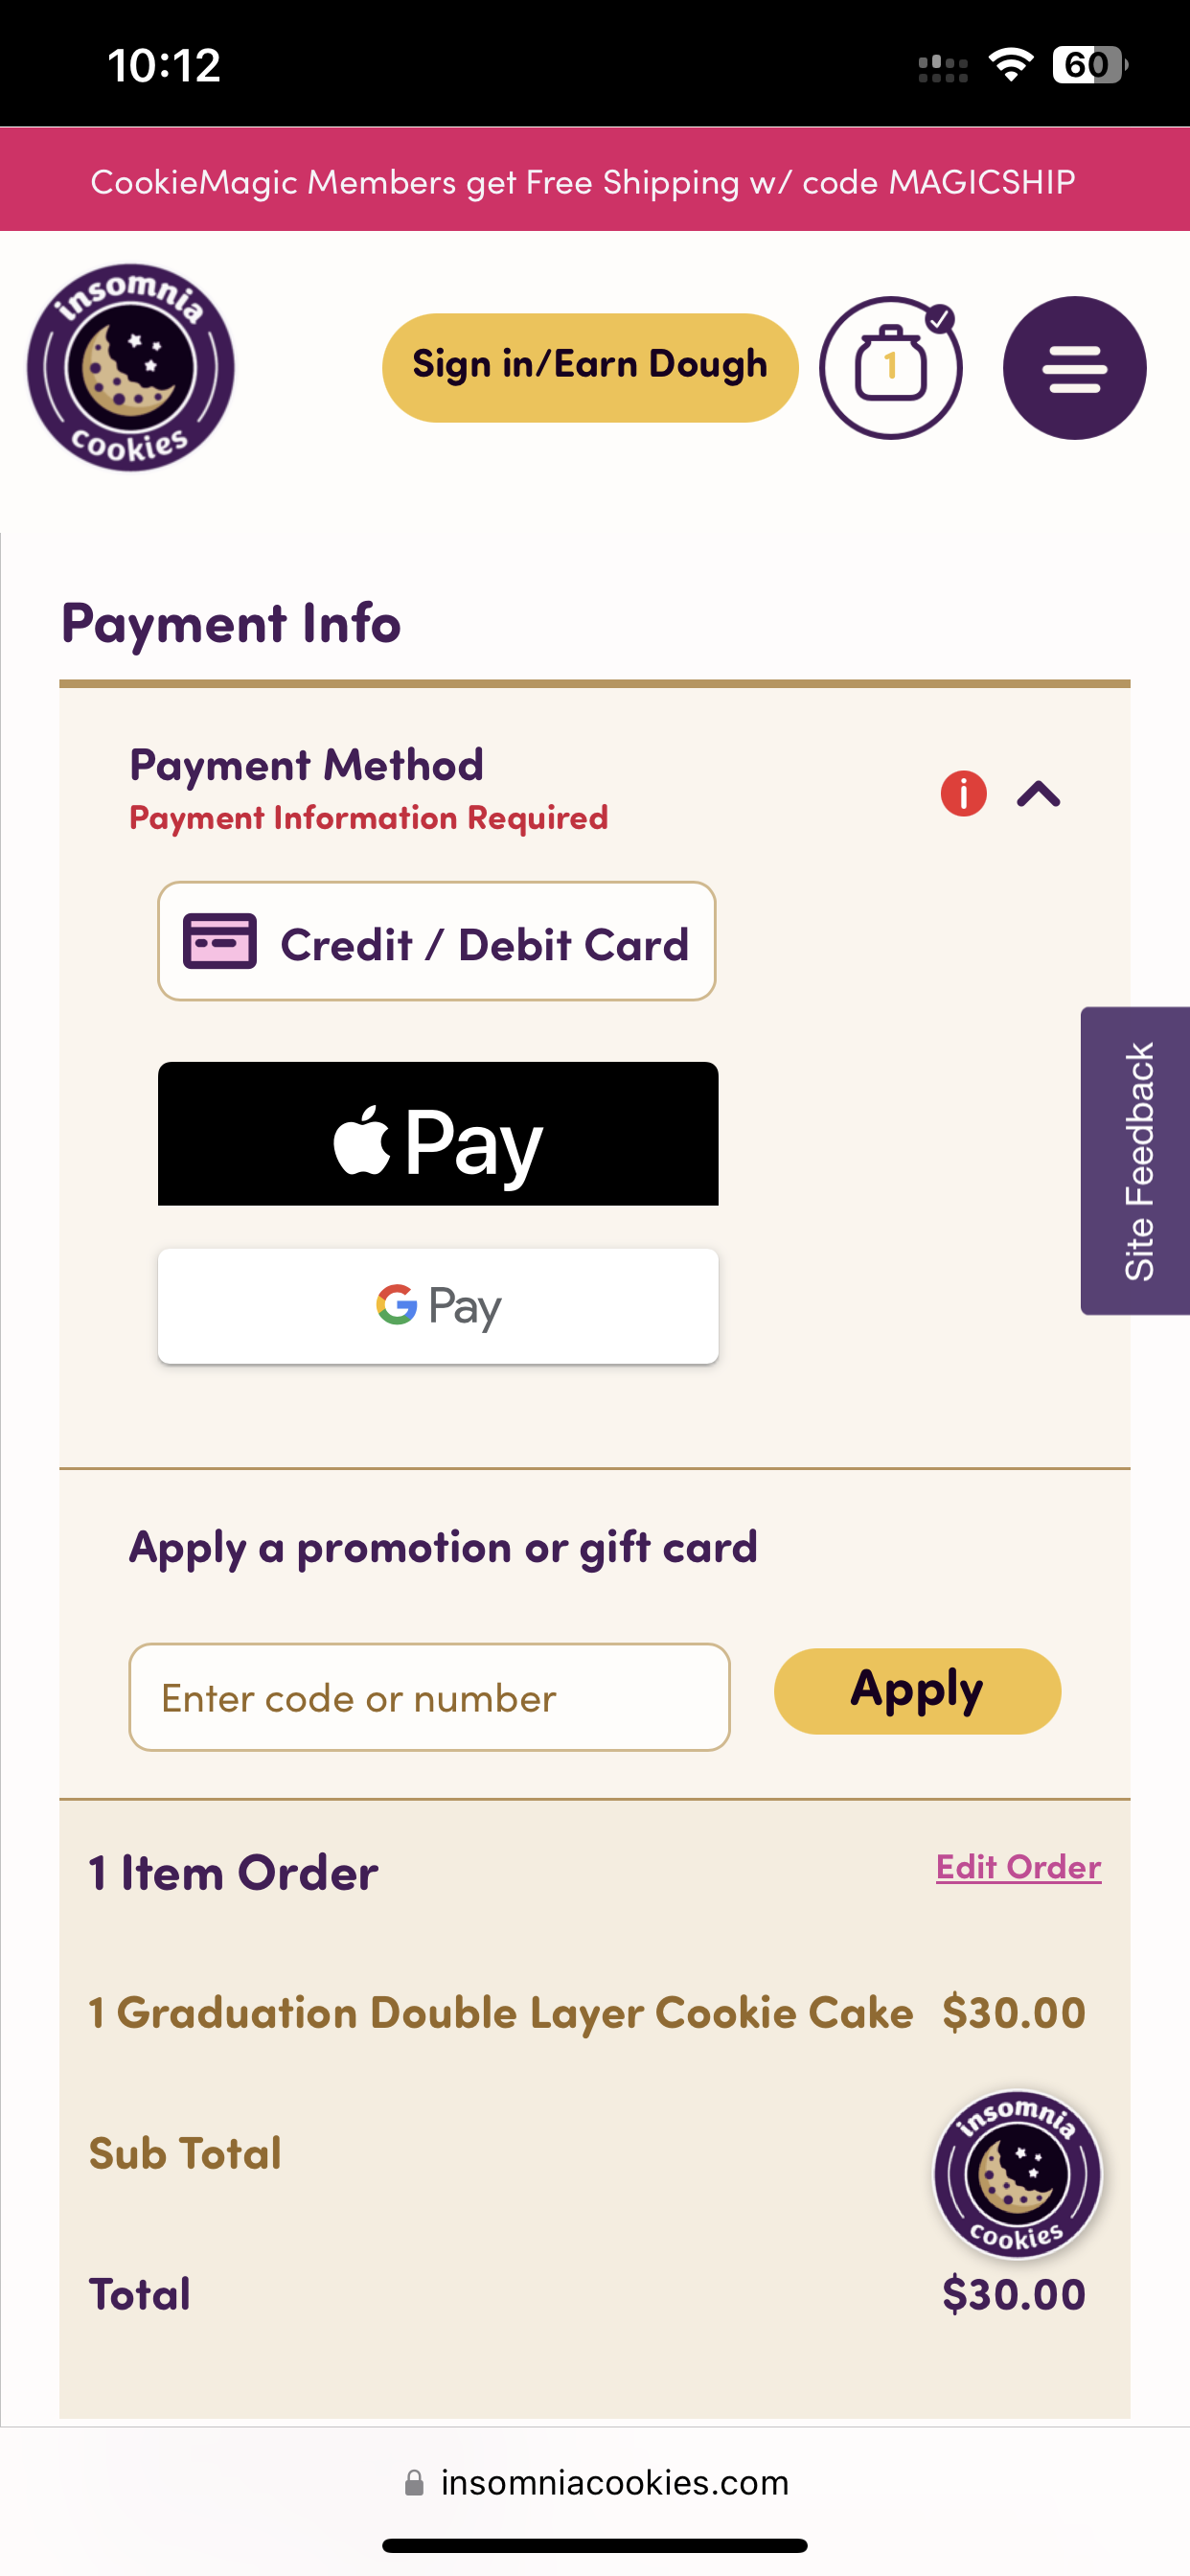 Insomnia Cookies accepts Google Pay & Apple Pay online.